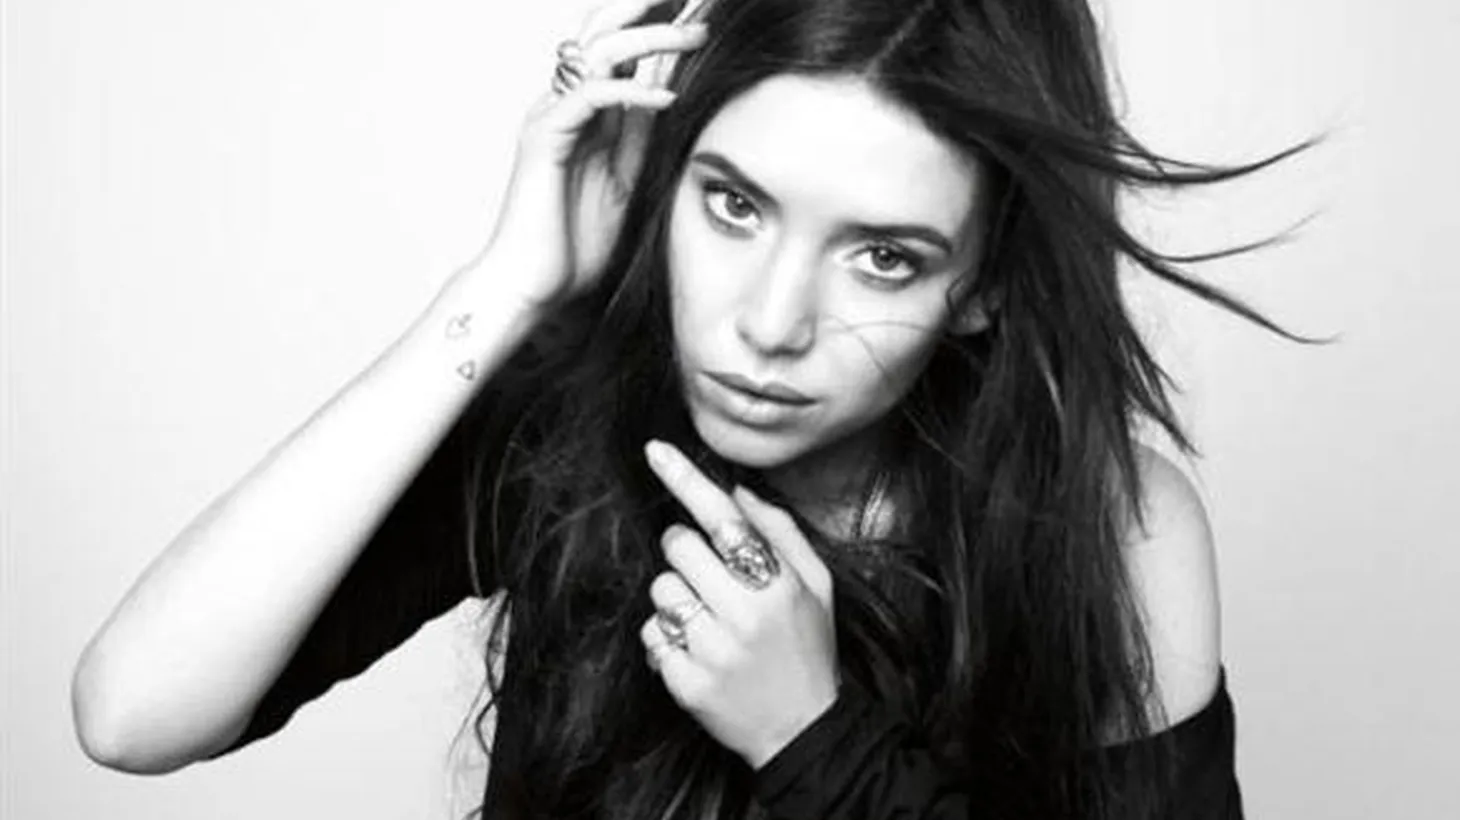 Swedish singer Lykke Li crafts perfect pop songs and each track she's revealed from her new album is better than the last. Lykke will perform new songs from that highly anticipated new record, Wounded Rhymes,  live on Morning Becomes Eclectic at 11:15am.